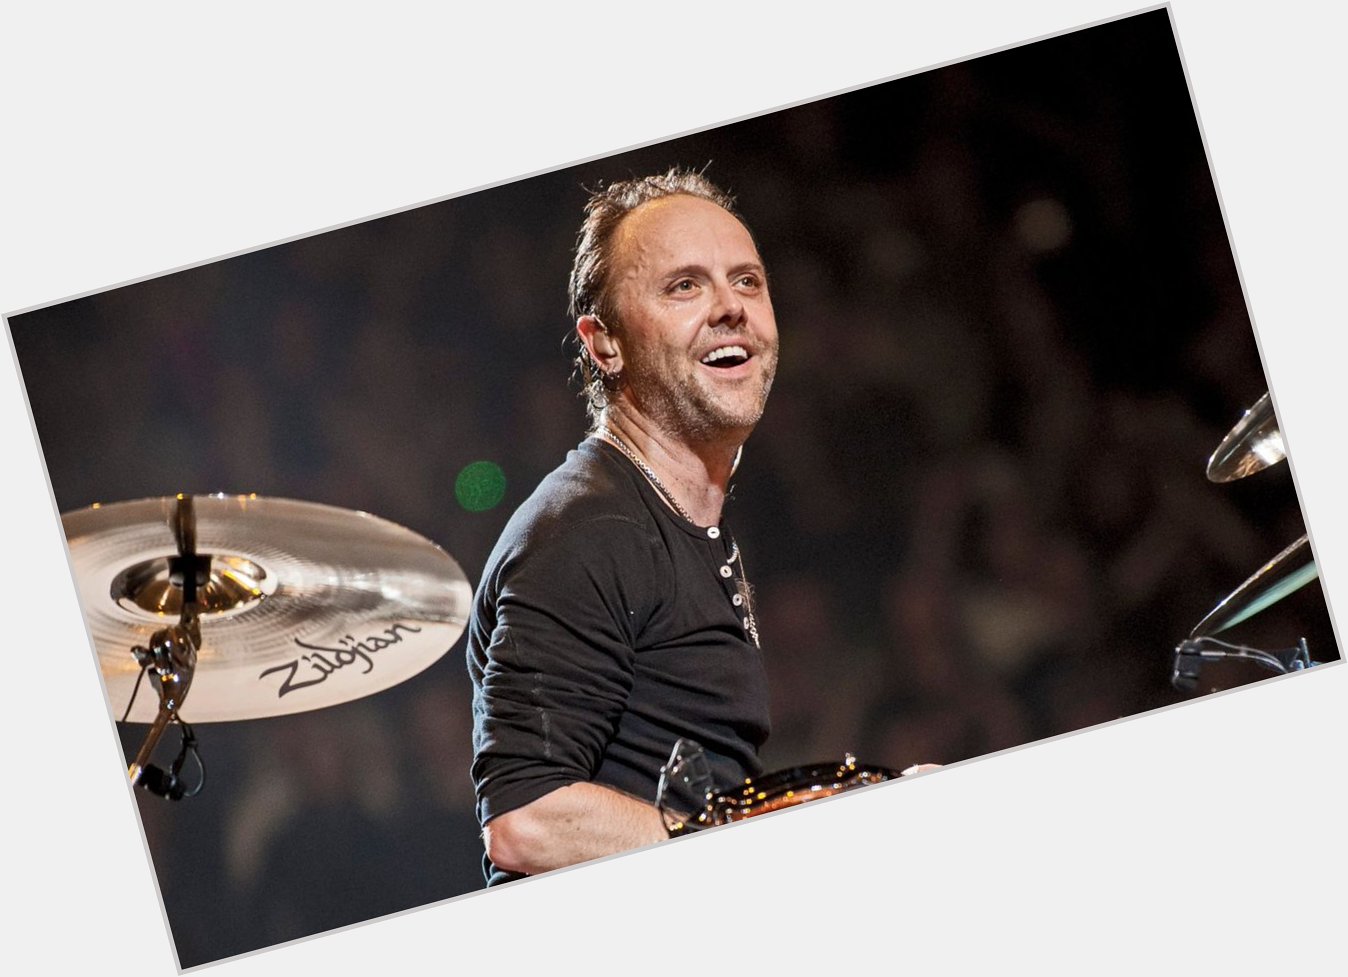 Happy 52nd birthday to LARS ULRICH!  